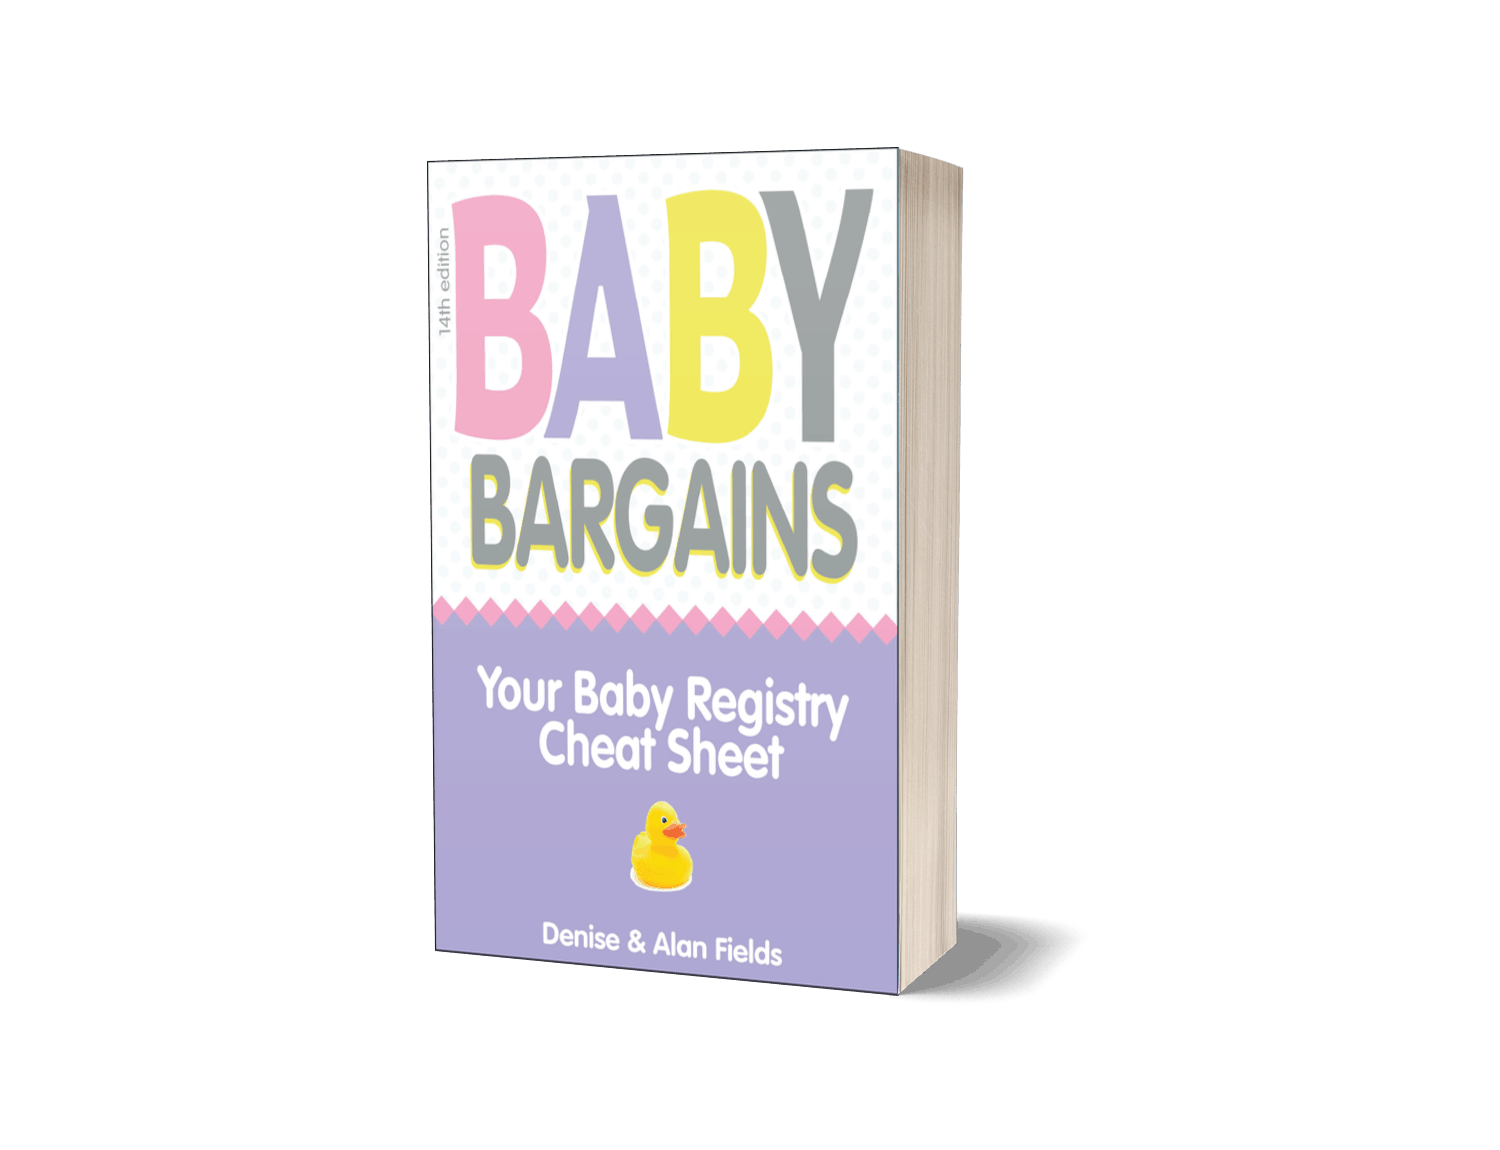 The Baby Bargains Book